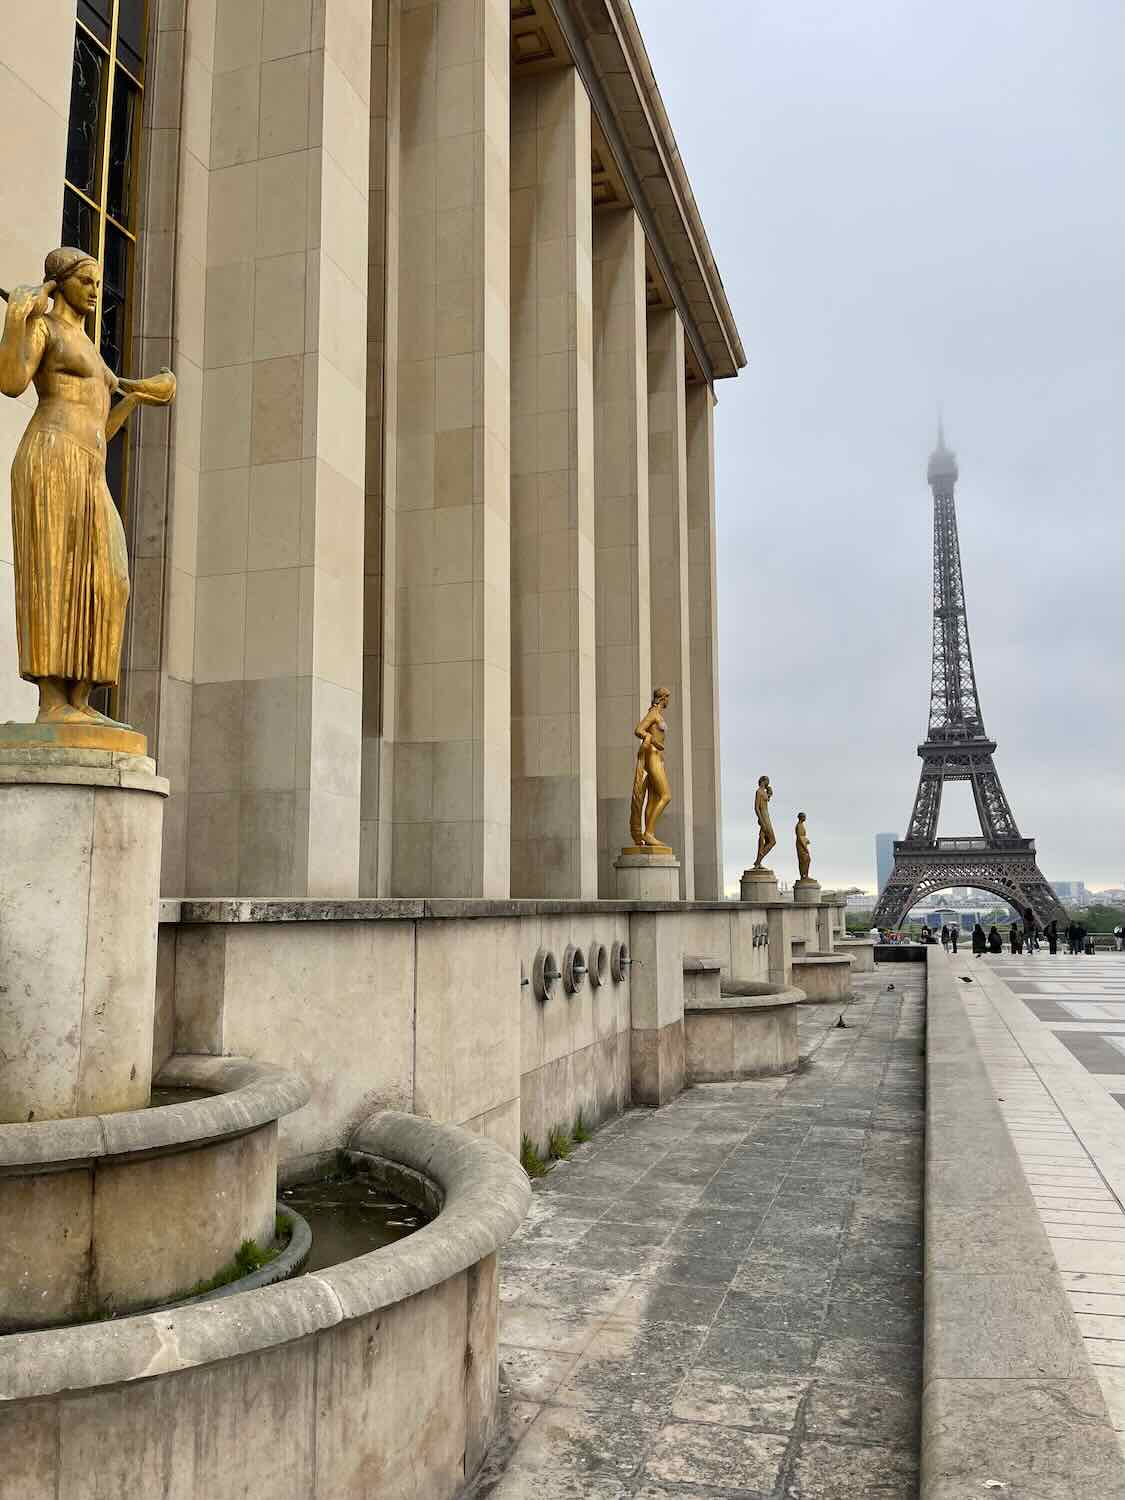 A view from the Trocadero towards the Eiffel Tower in Paris, showing golden statues and fountains along a wide esplanade, with the iconic tower in the misty background.